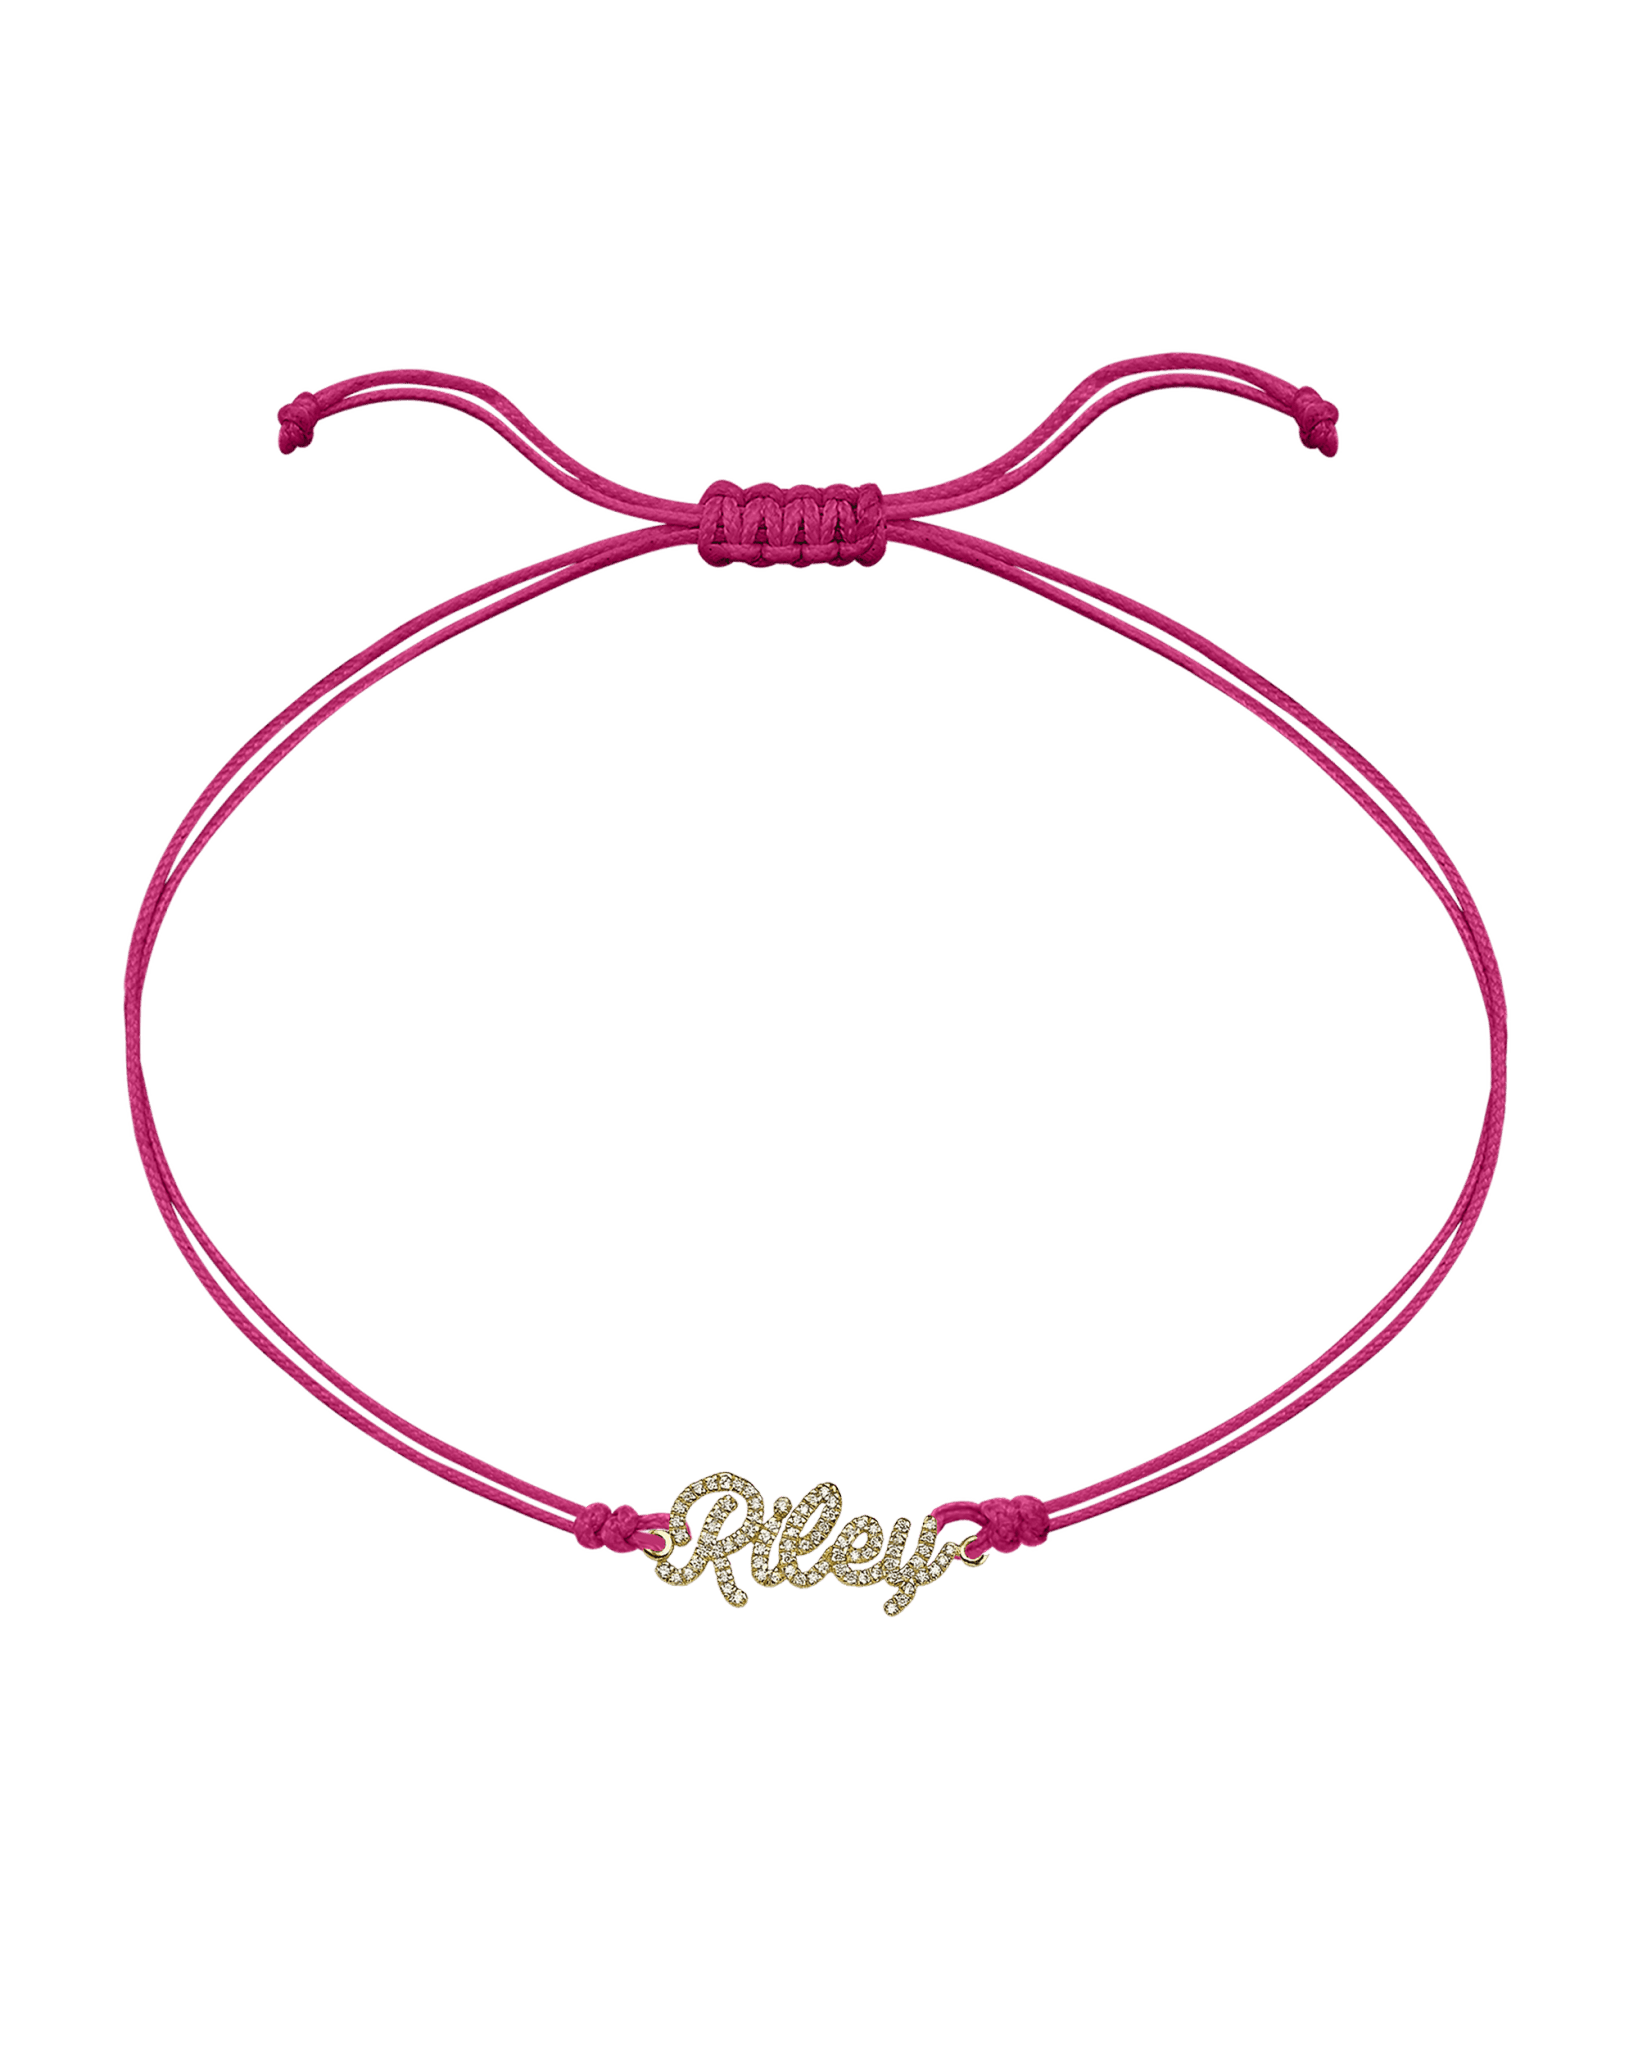 Paved Name Plate String of Love - 14K Yellow Gold Bracelet 14K Solid Gold Pink 1 